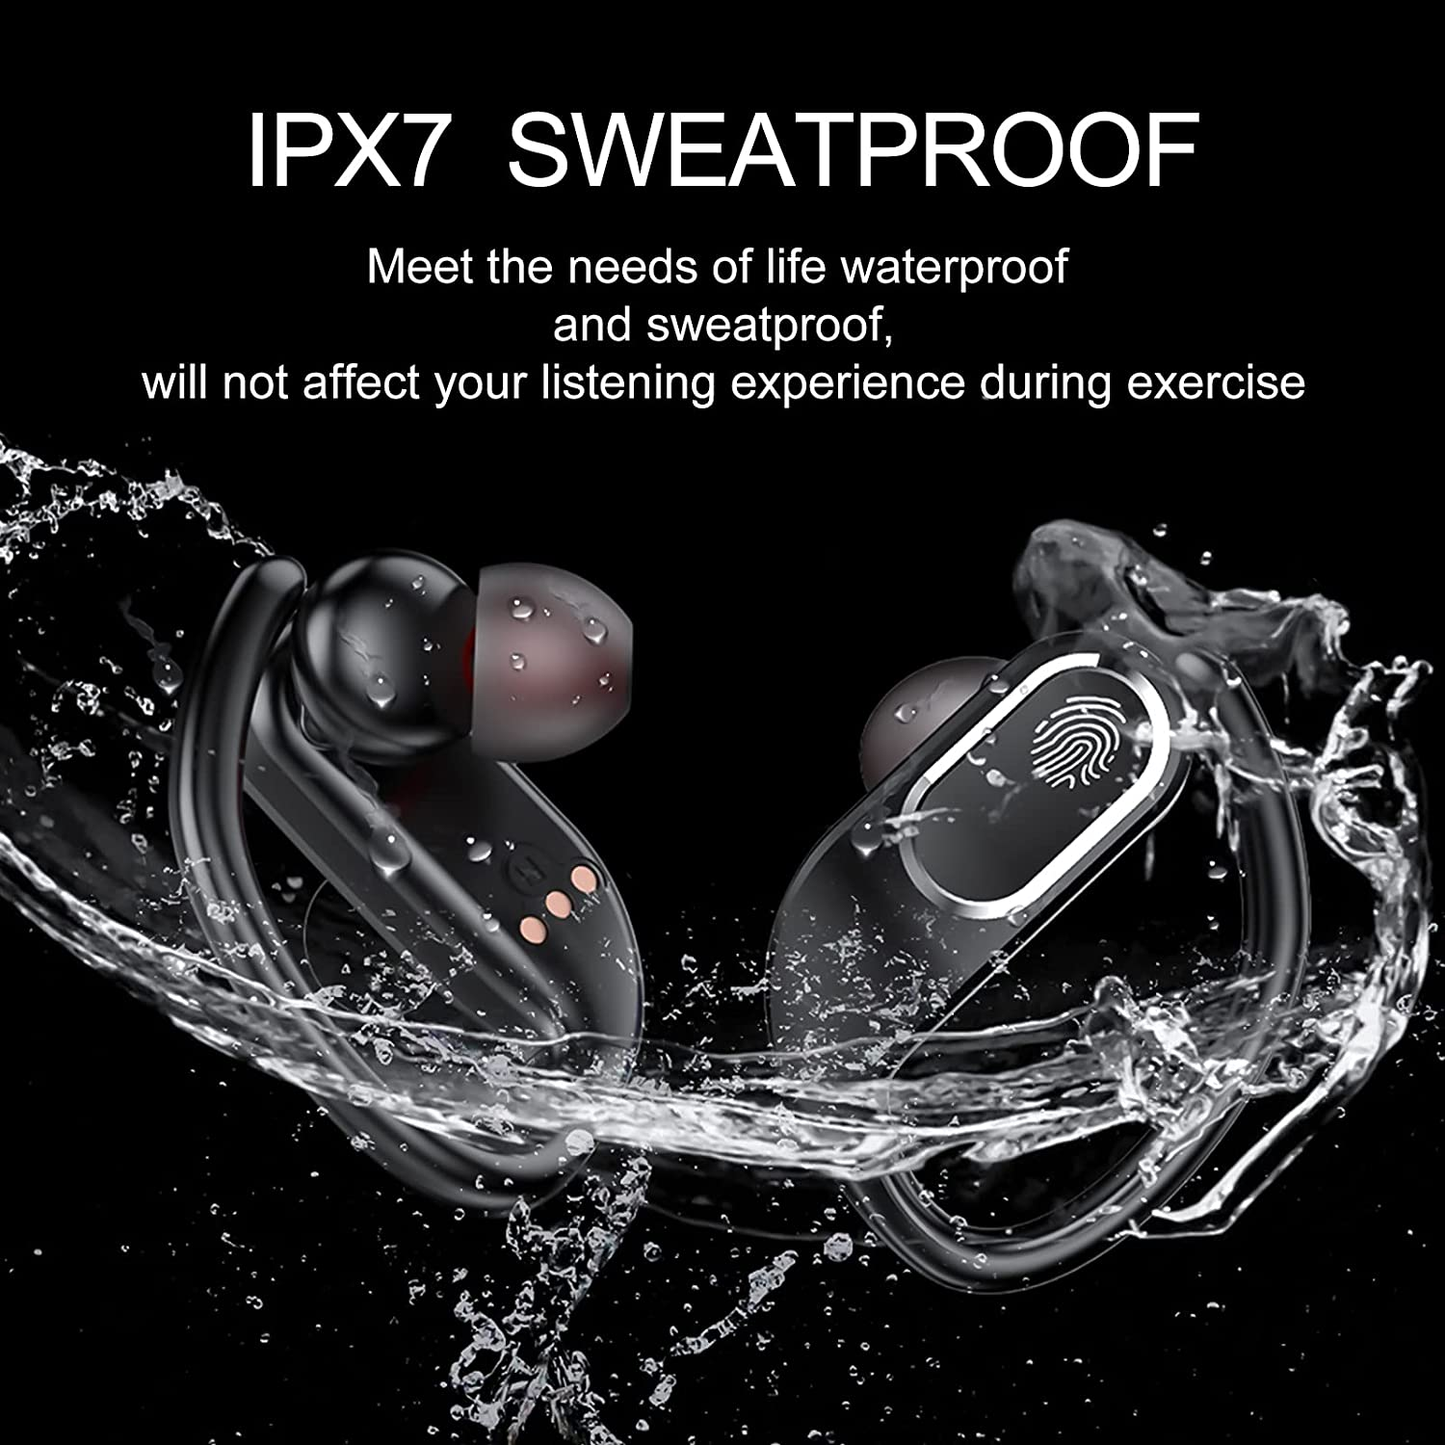 Wireless Earbuds Sports, Bluetooth 5.0 Headphones Noise Reduction 48Hrs Playtime Deep Bass in Ear Earphones with Earhooks, 1000Mah Charging Case, Waterproof Built-In HD Mic Headset for Workout